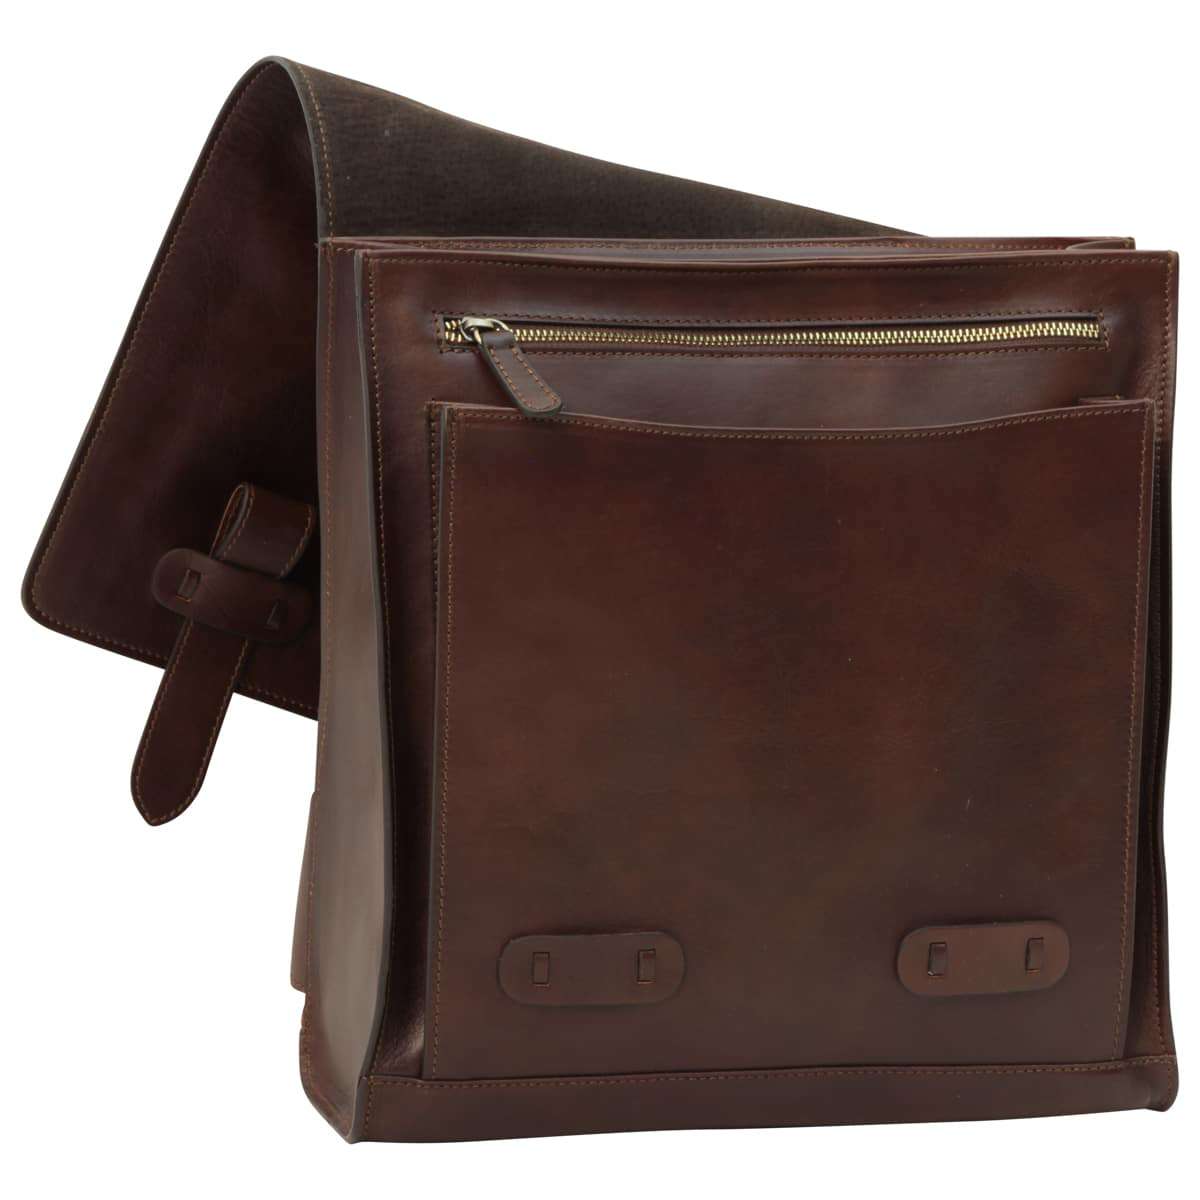 Cowhide leather backpack with double buckle closure - Dark Brown | 411689TM UK | Old Angler Firenze